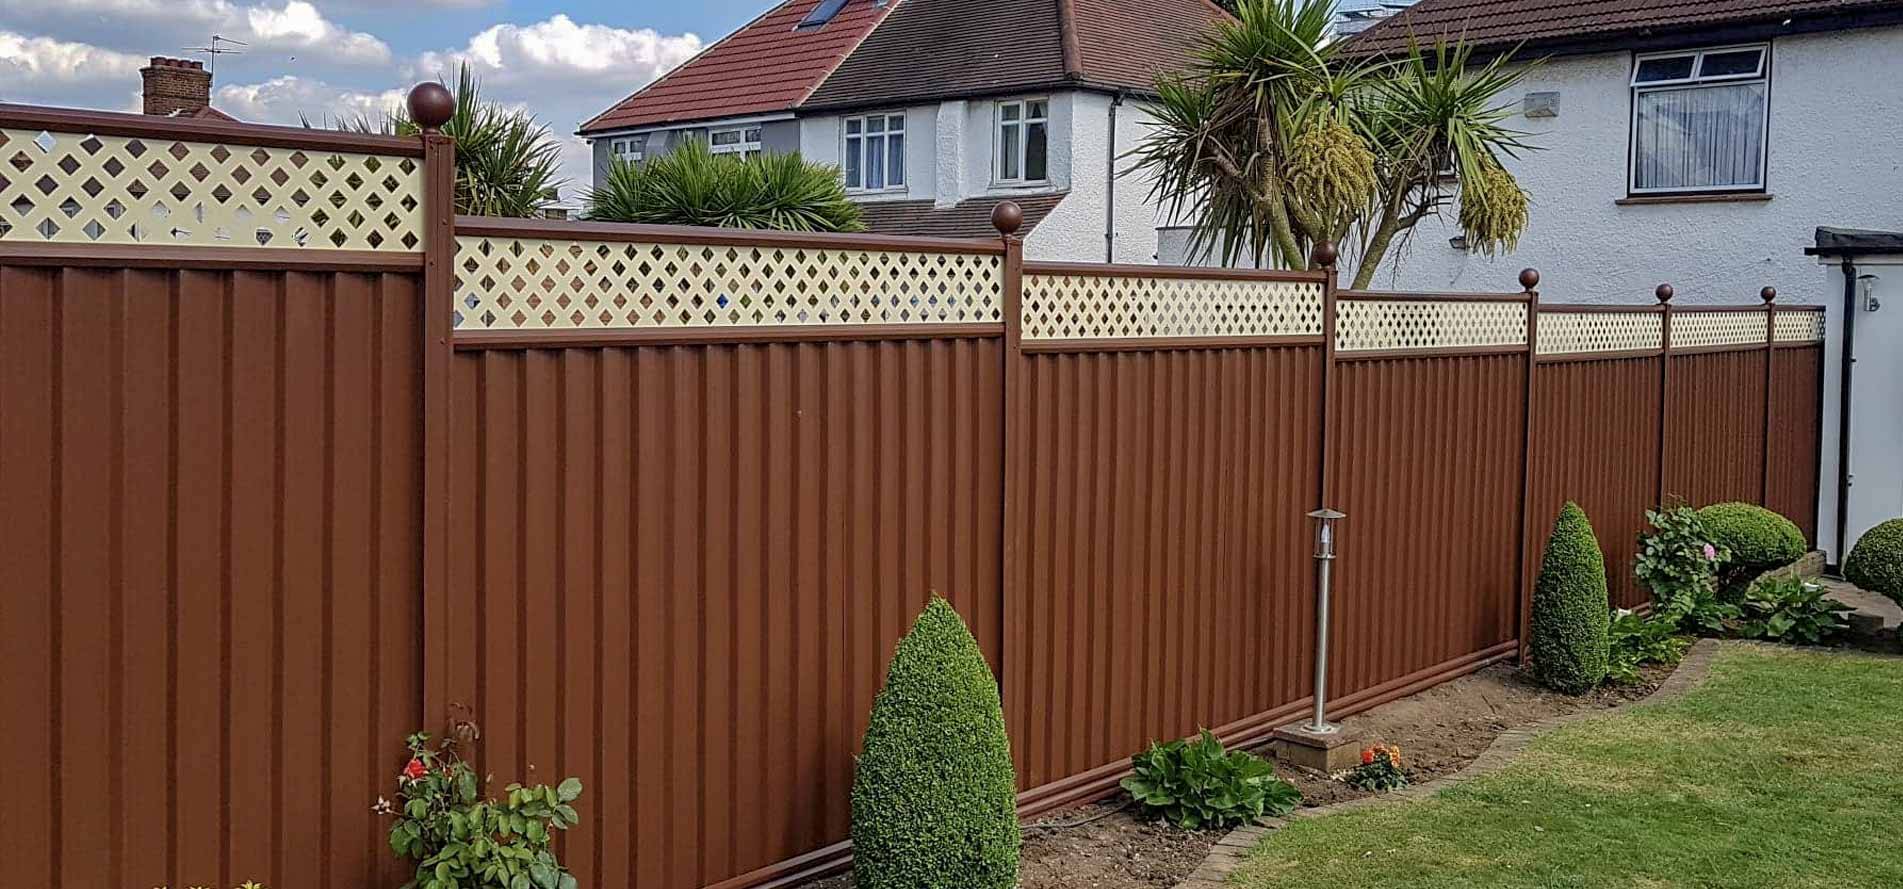 Easy And Cheap Privacy Fence Design Ideas Napiernewsinfo